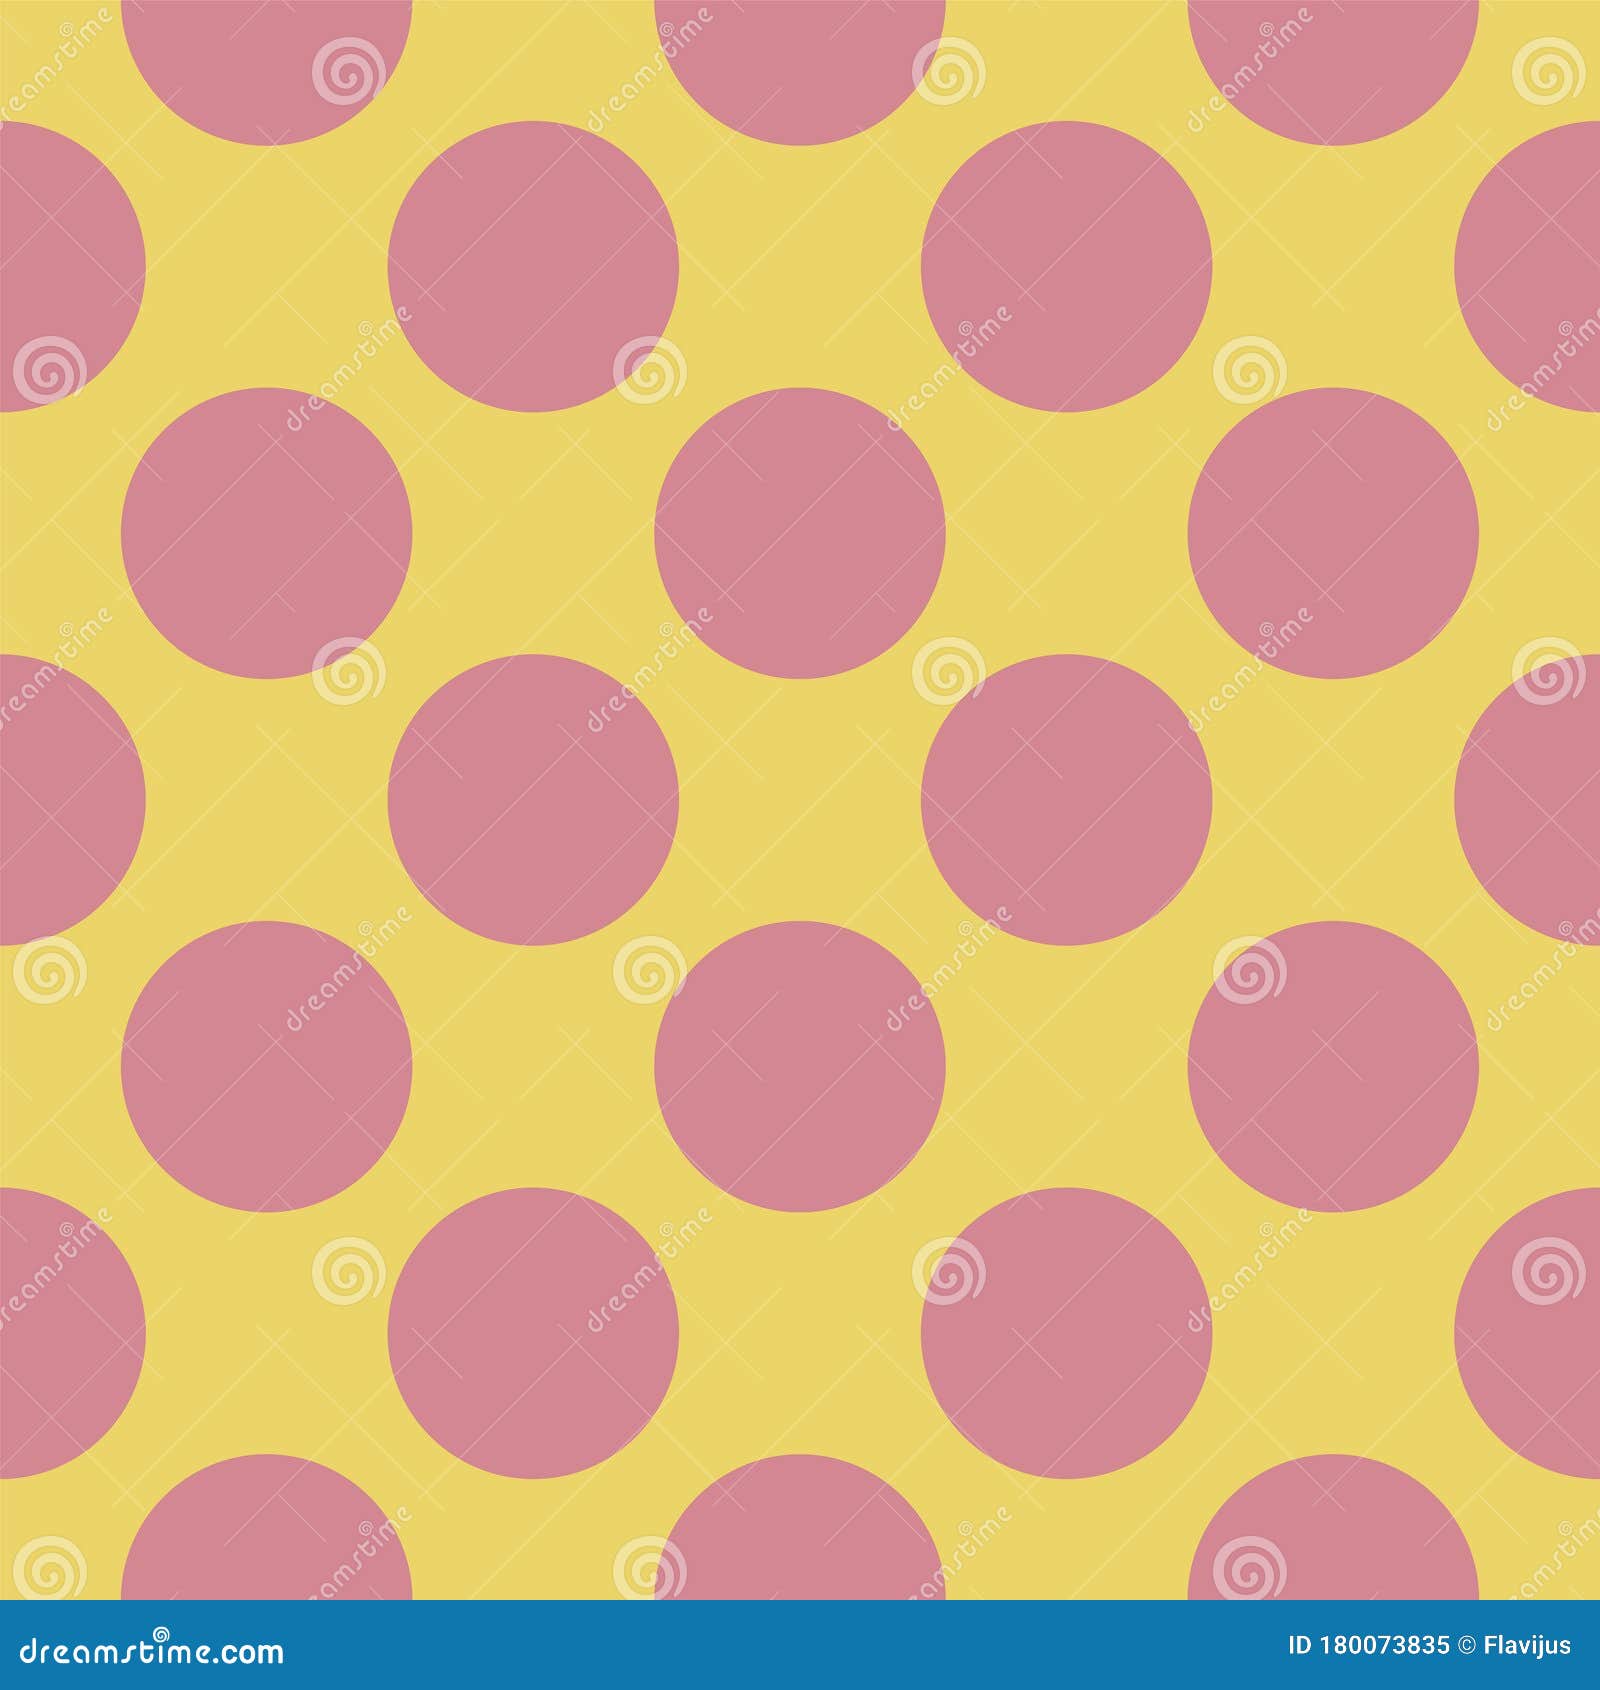 Seamless Pattern of Large Pink Polka Dots on a Yellow Pastel Background ...